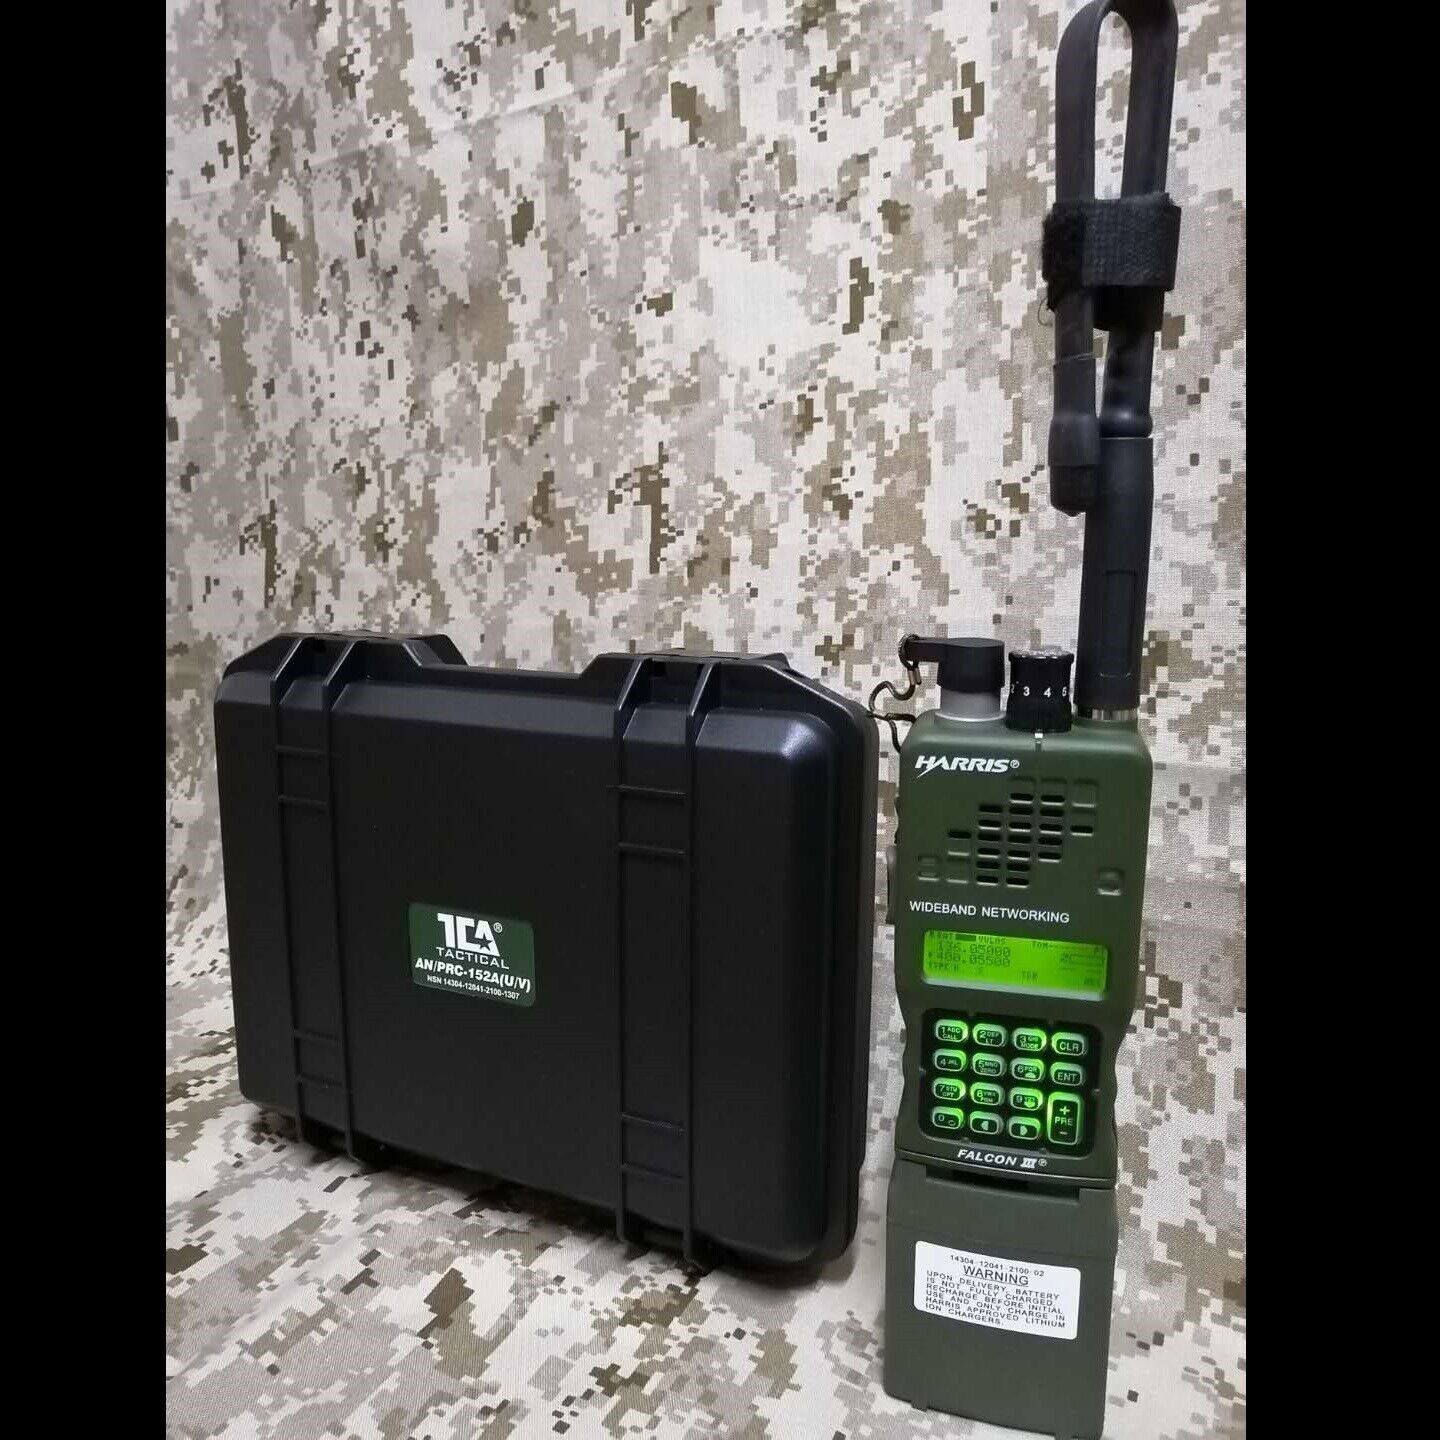 Tactical Handheld FM Radio PRC-152A Dual Band VHF/UHF Walkie Talkie(US In Stock)